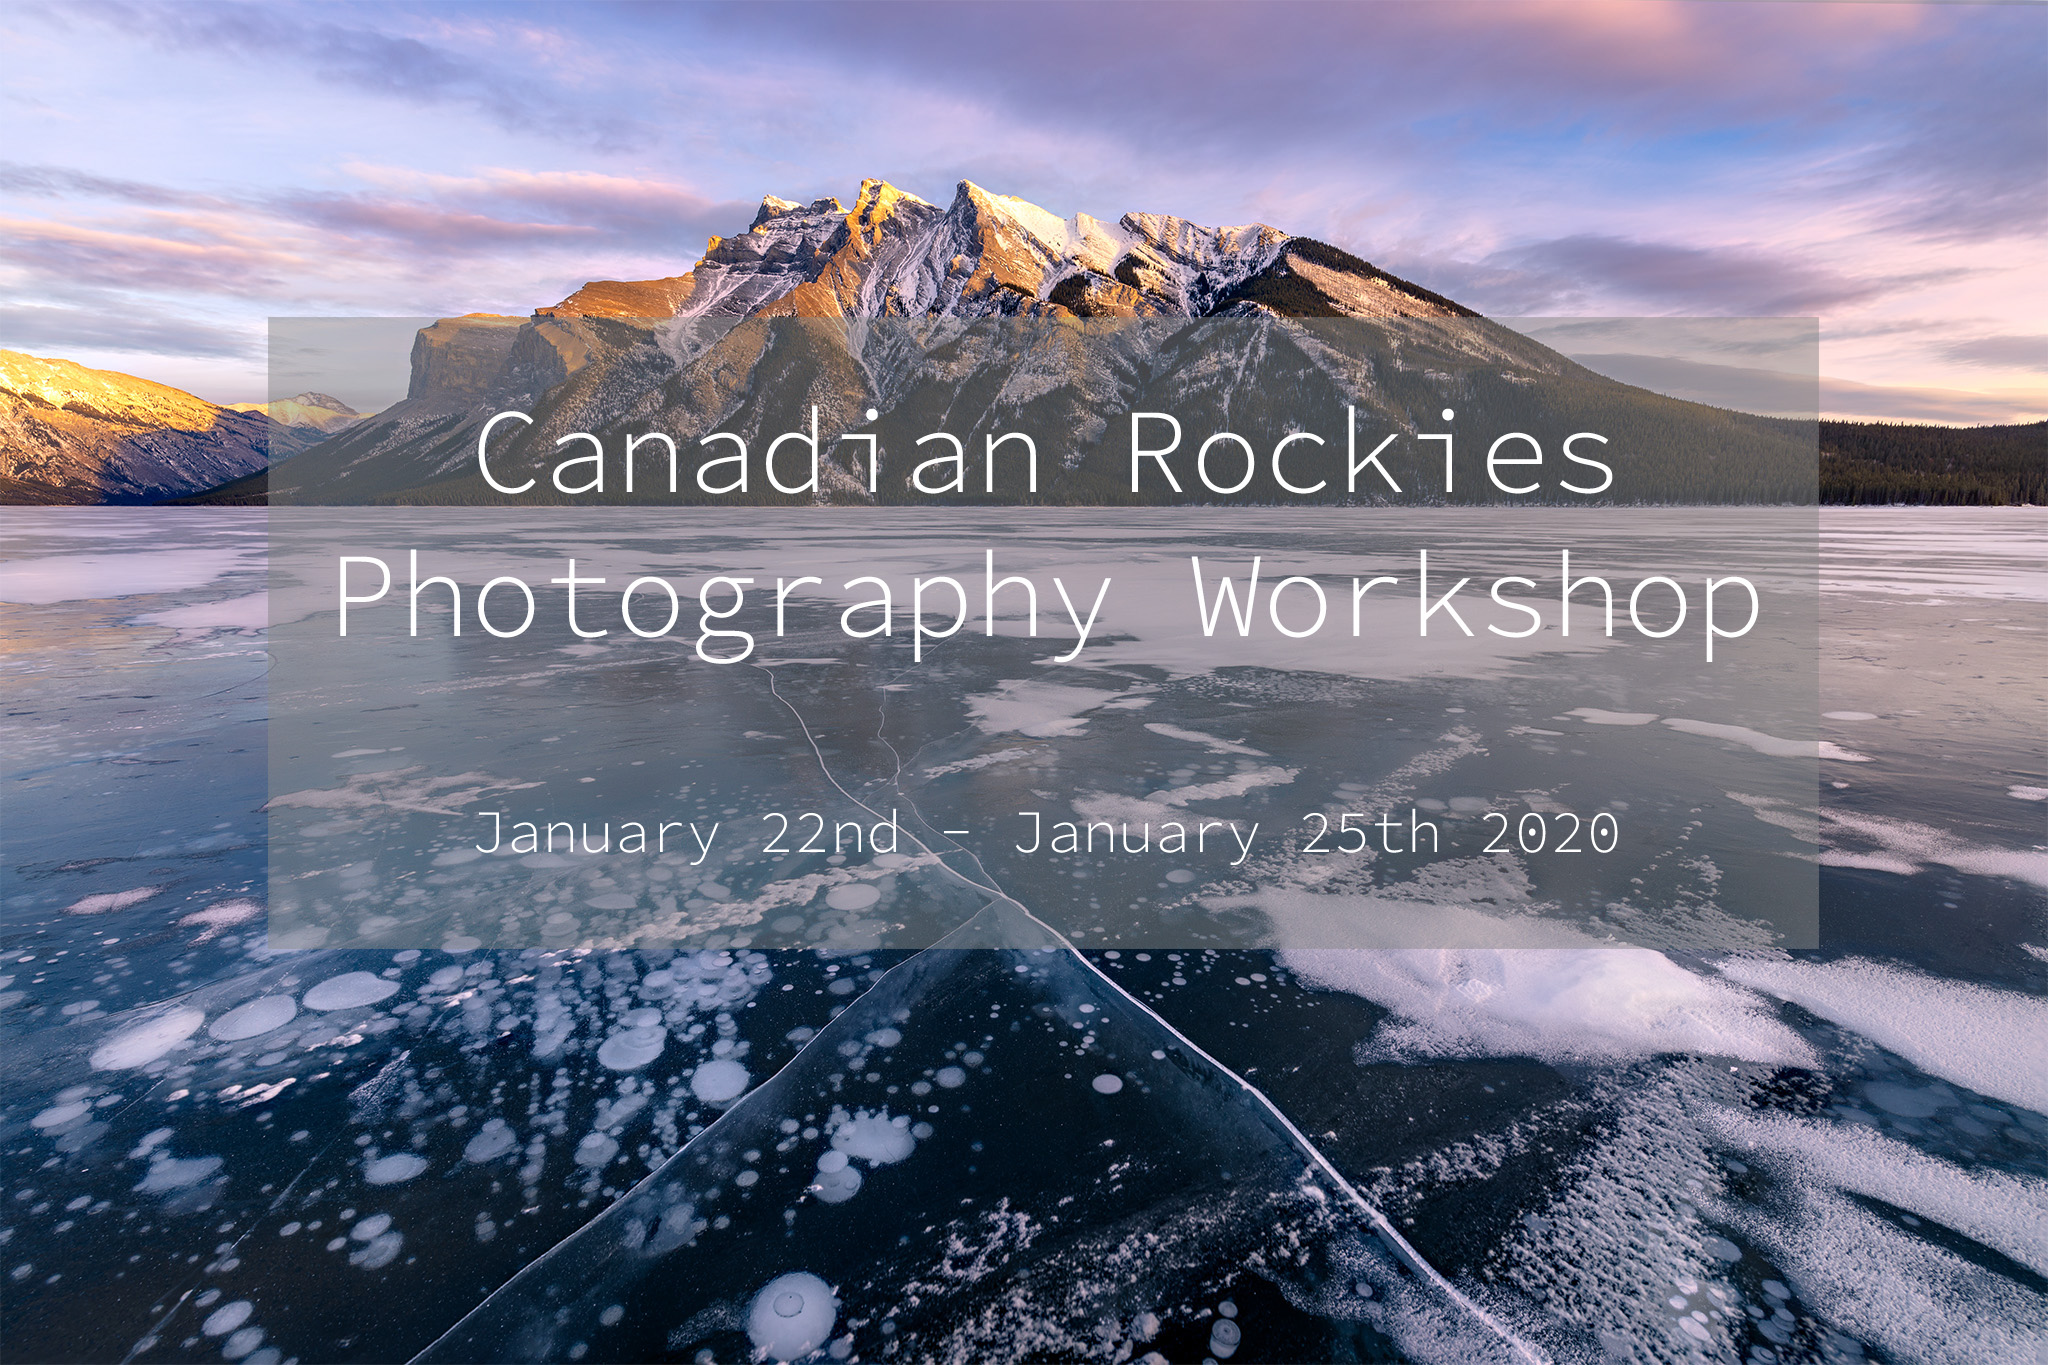 A photography workshop in the Canadian Rockies in Winter 2020